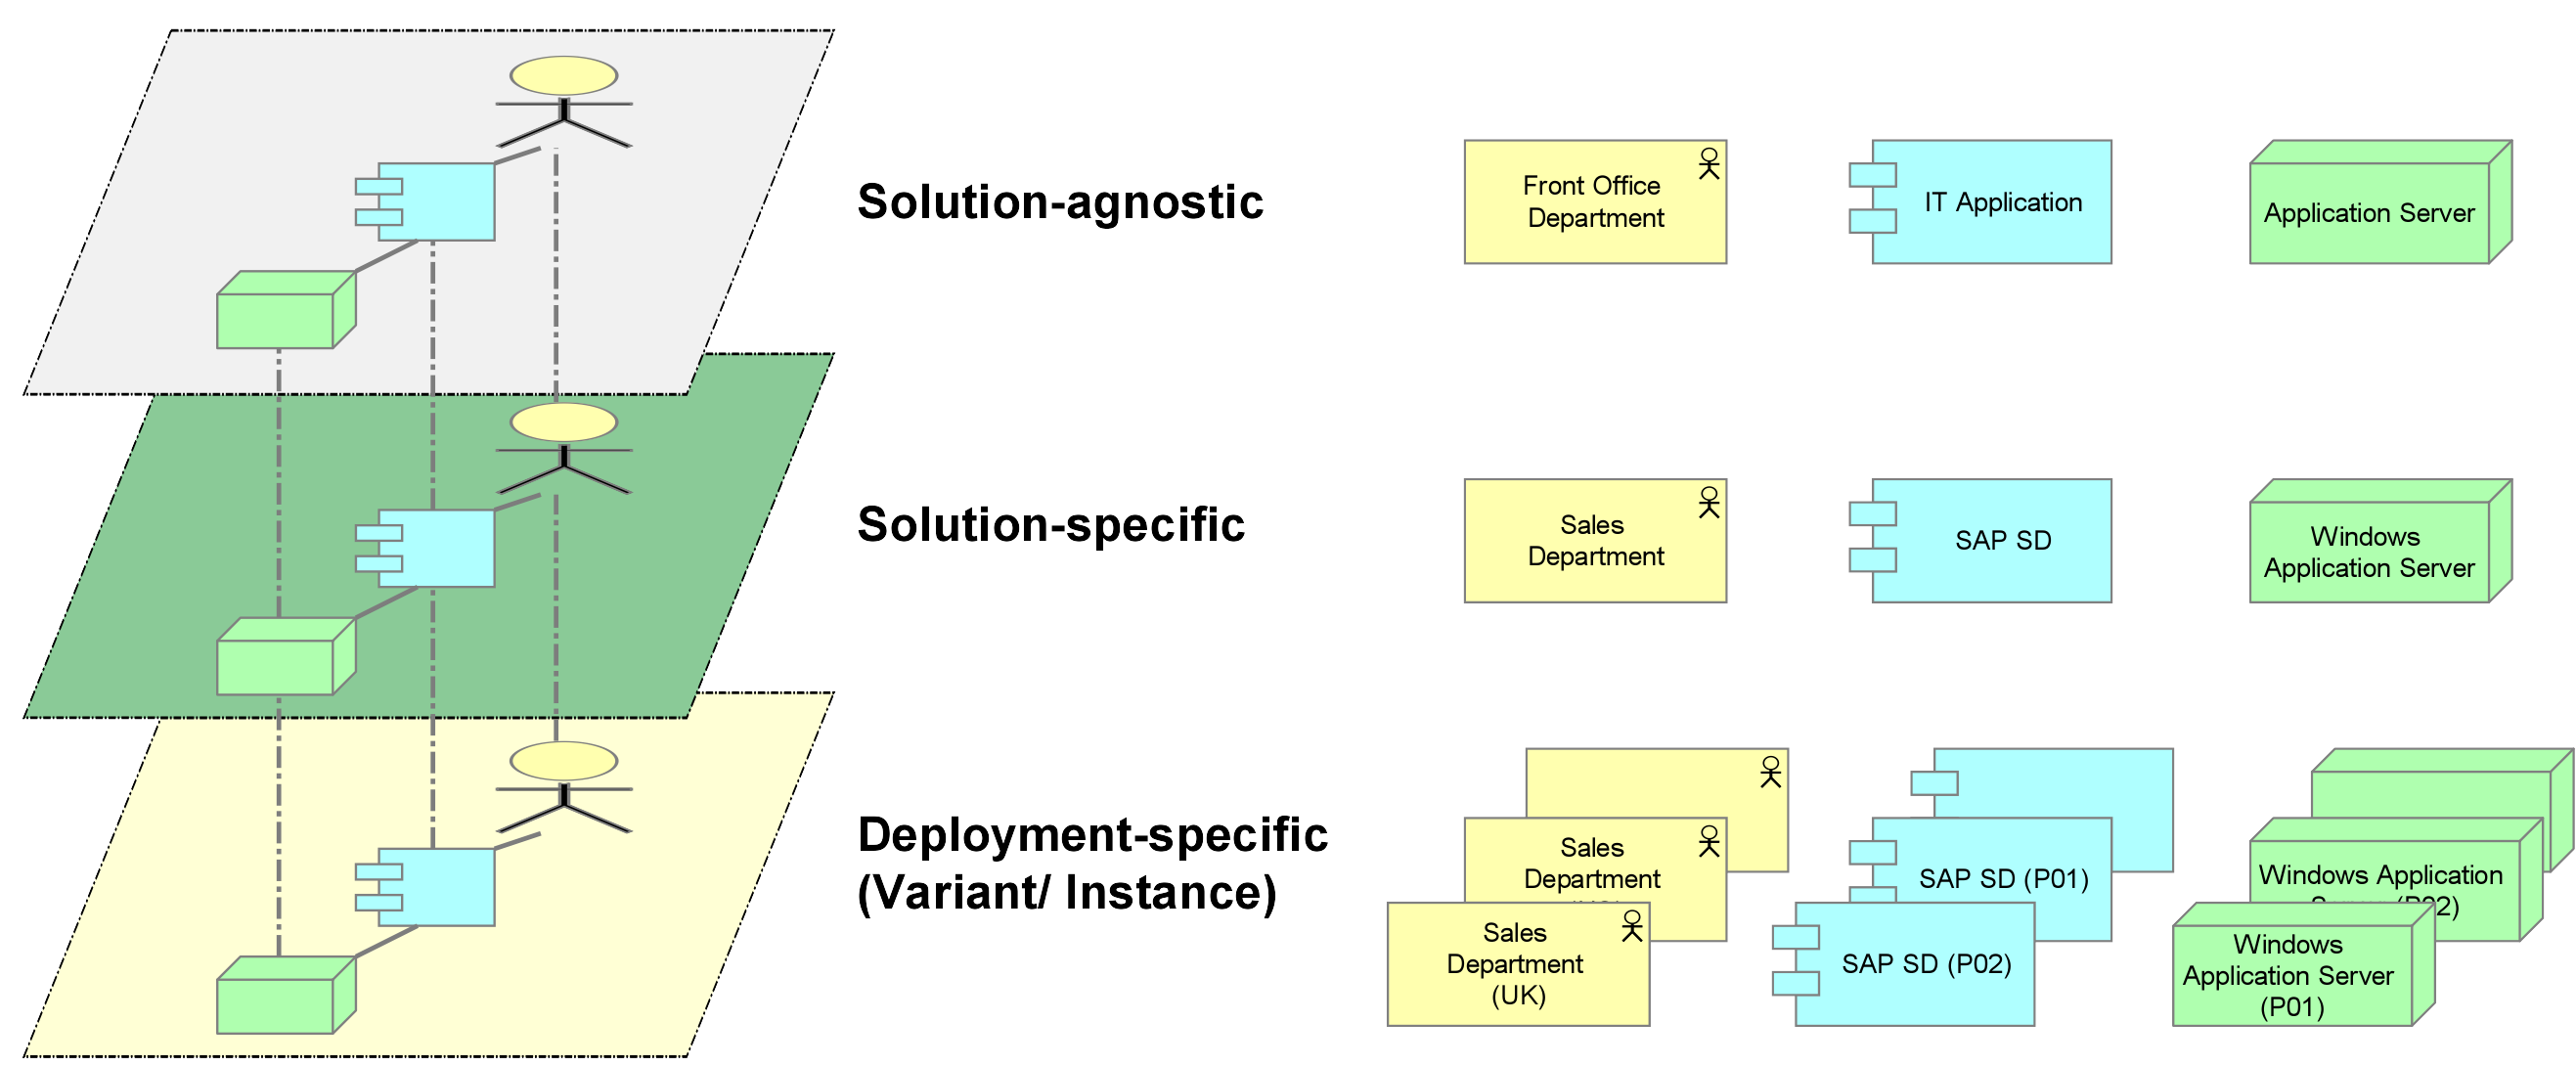 An Overview of the Levels of Abstraction in Enterprise Architecture